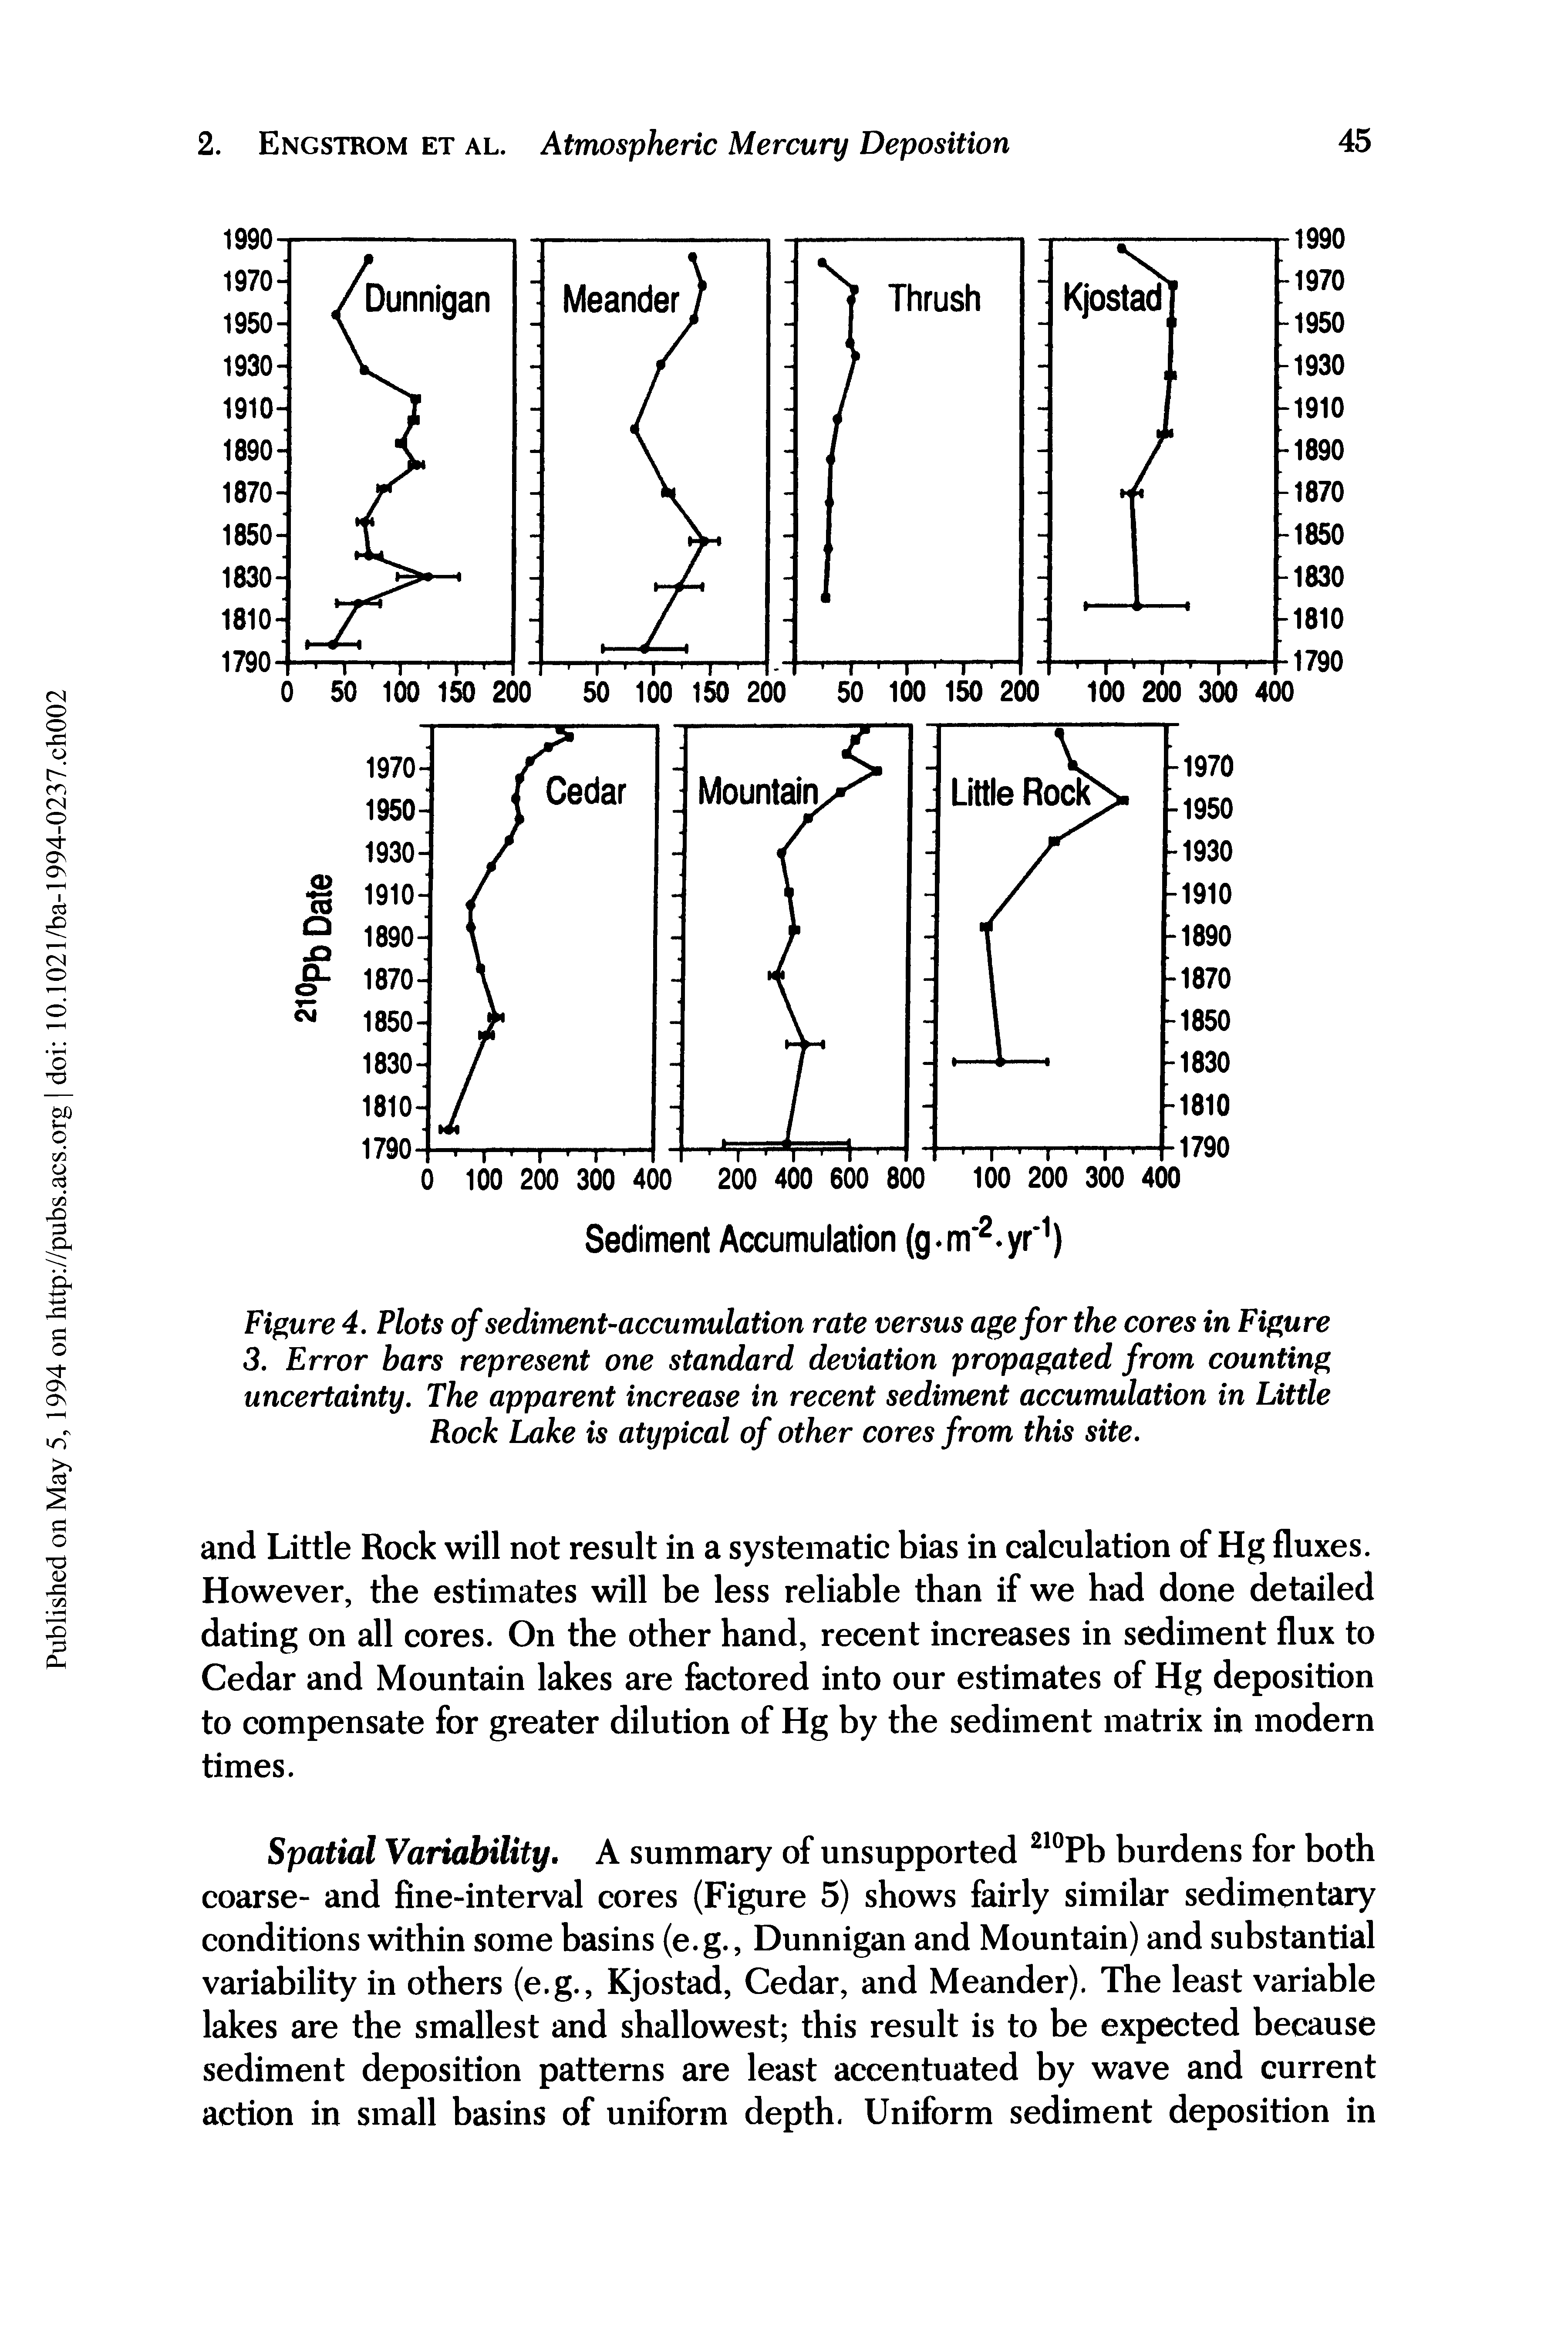 Figure 4. Plots of sediment-accumulation rate versus age for the cores in Figure 3. Error bars represent one standard deviation propagated from counting uncertainty. The apparent increase in recent sediment accumulation in Little Rock Lake is atypical of other cores from this site.